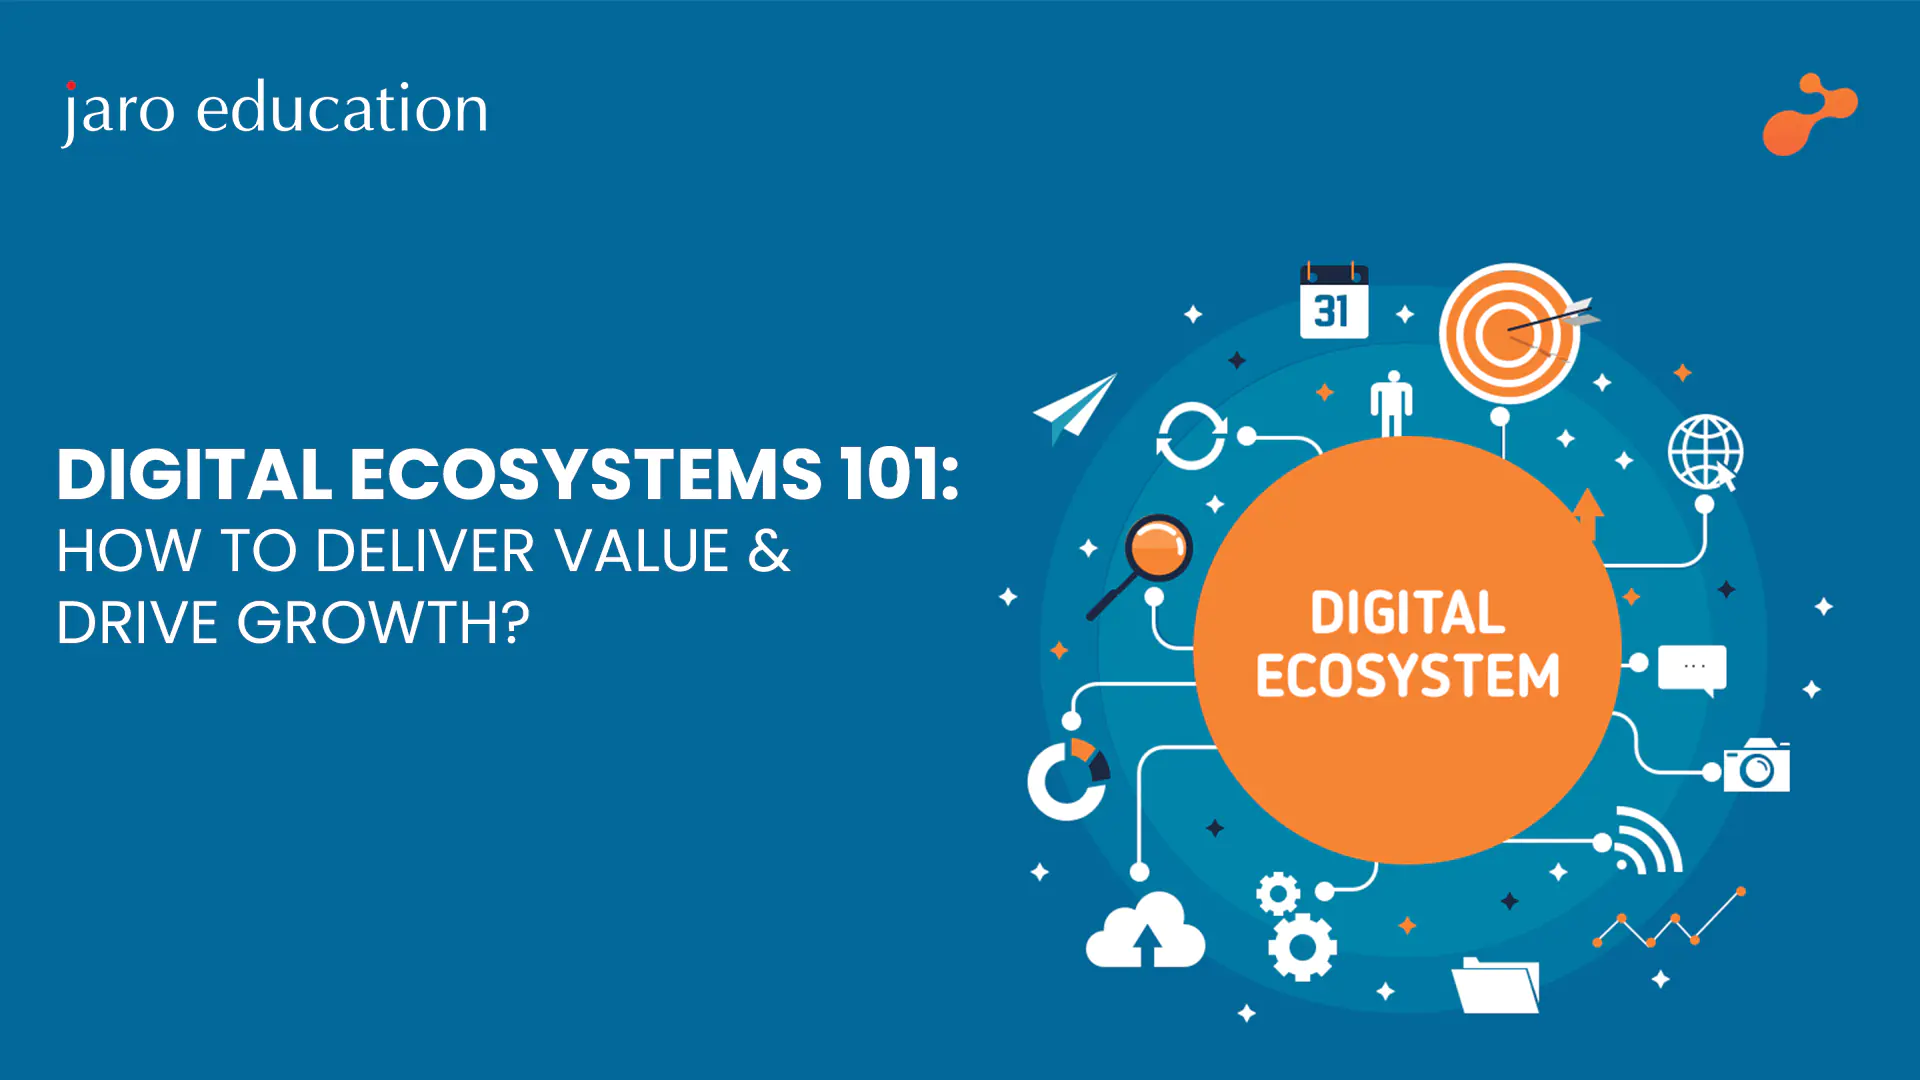 Digital Ecosystems 101 How to Deliver Value & Drive Growth